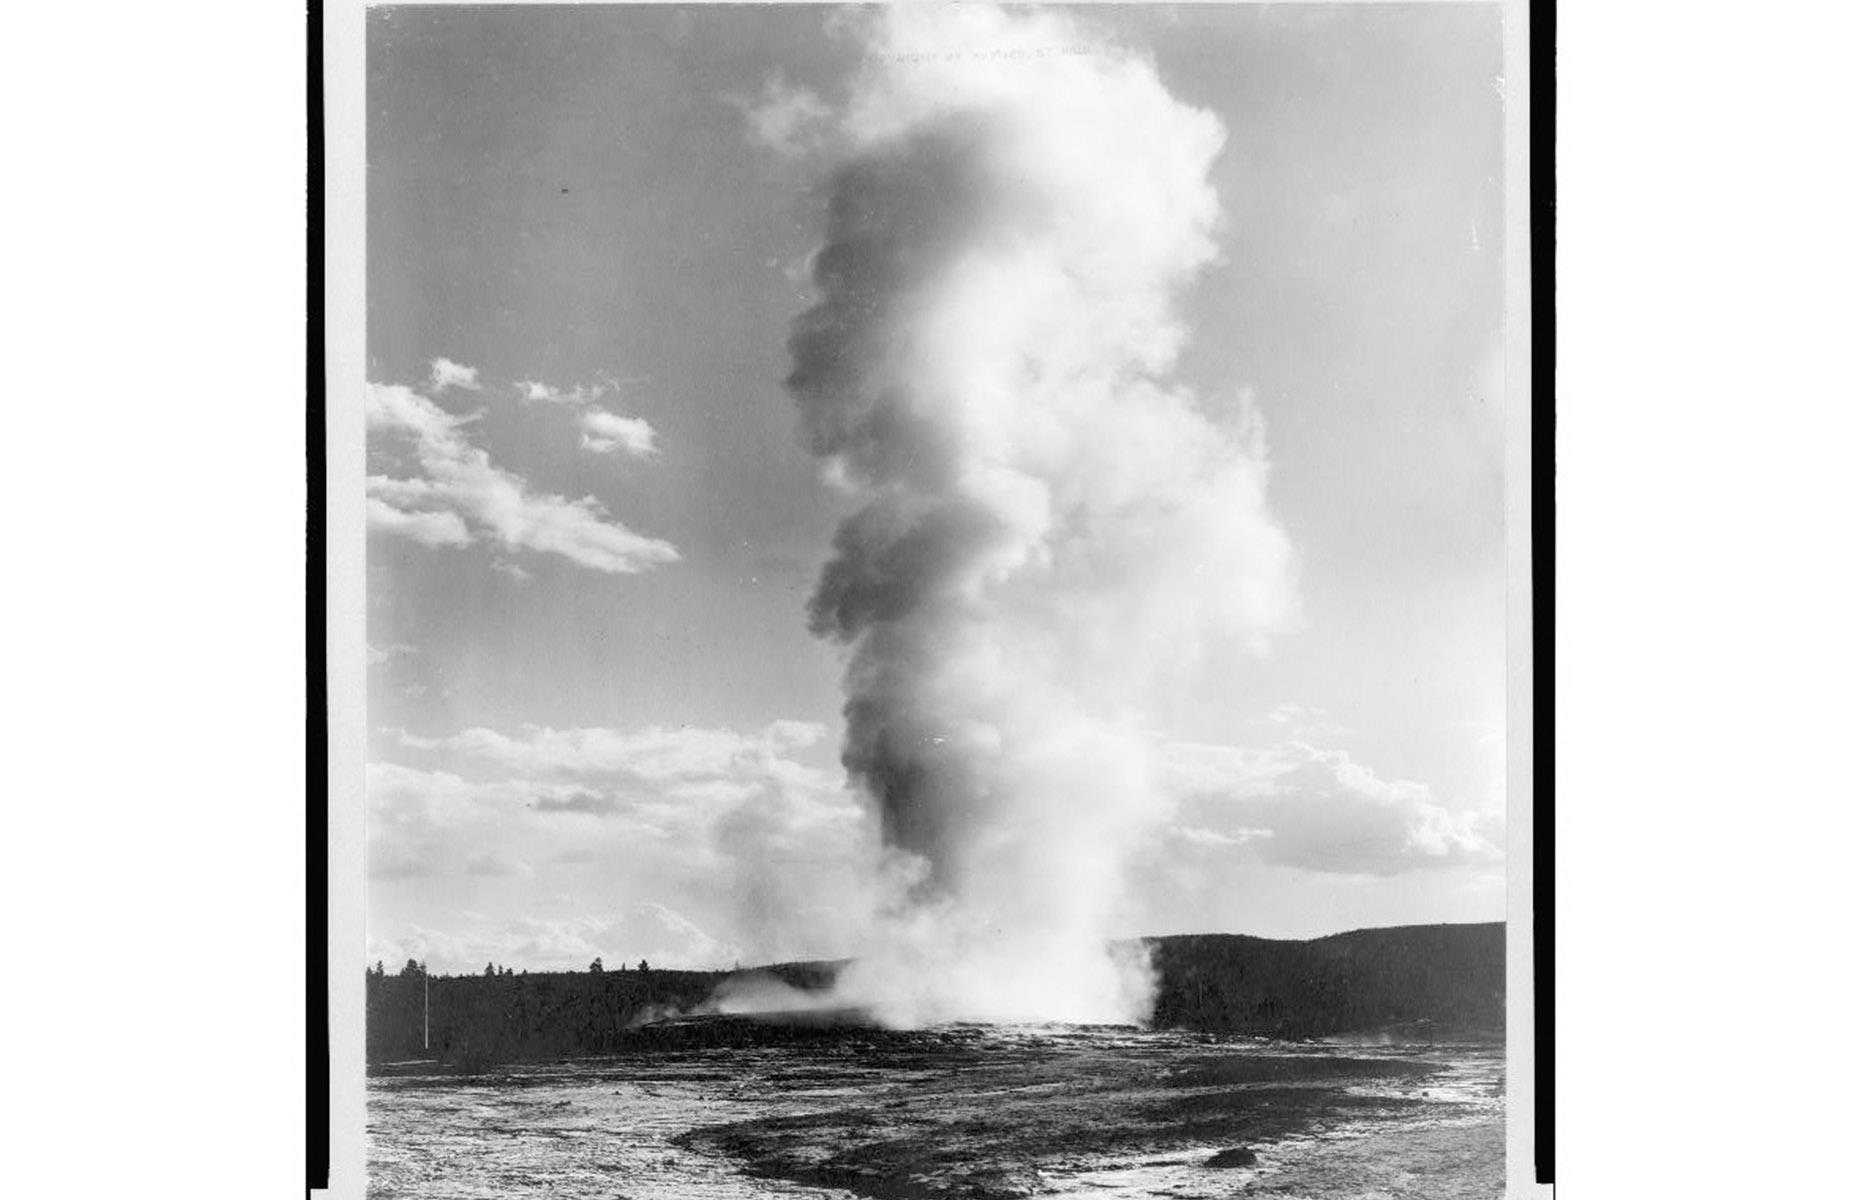 A major milestone came in 1916 with the birth of the National Park Service. The Act was signed by the 28th president, Woodrow Wilson and created a new federal organization dedicated to preserving the then 35 established national parks and monuments. The Act would cement the future of marvels like this one: Old Faithful geyser, pictured here circa 1916.